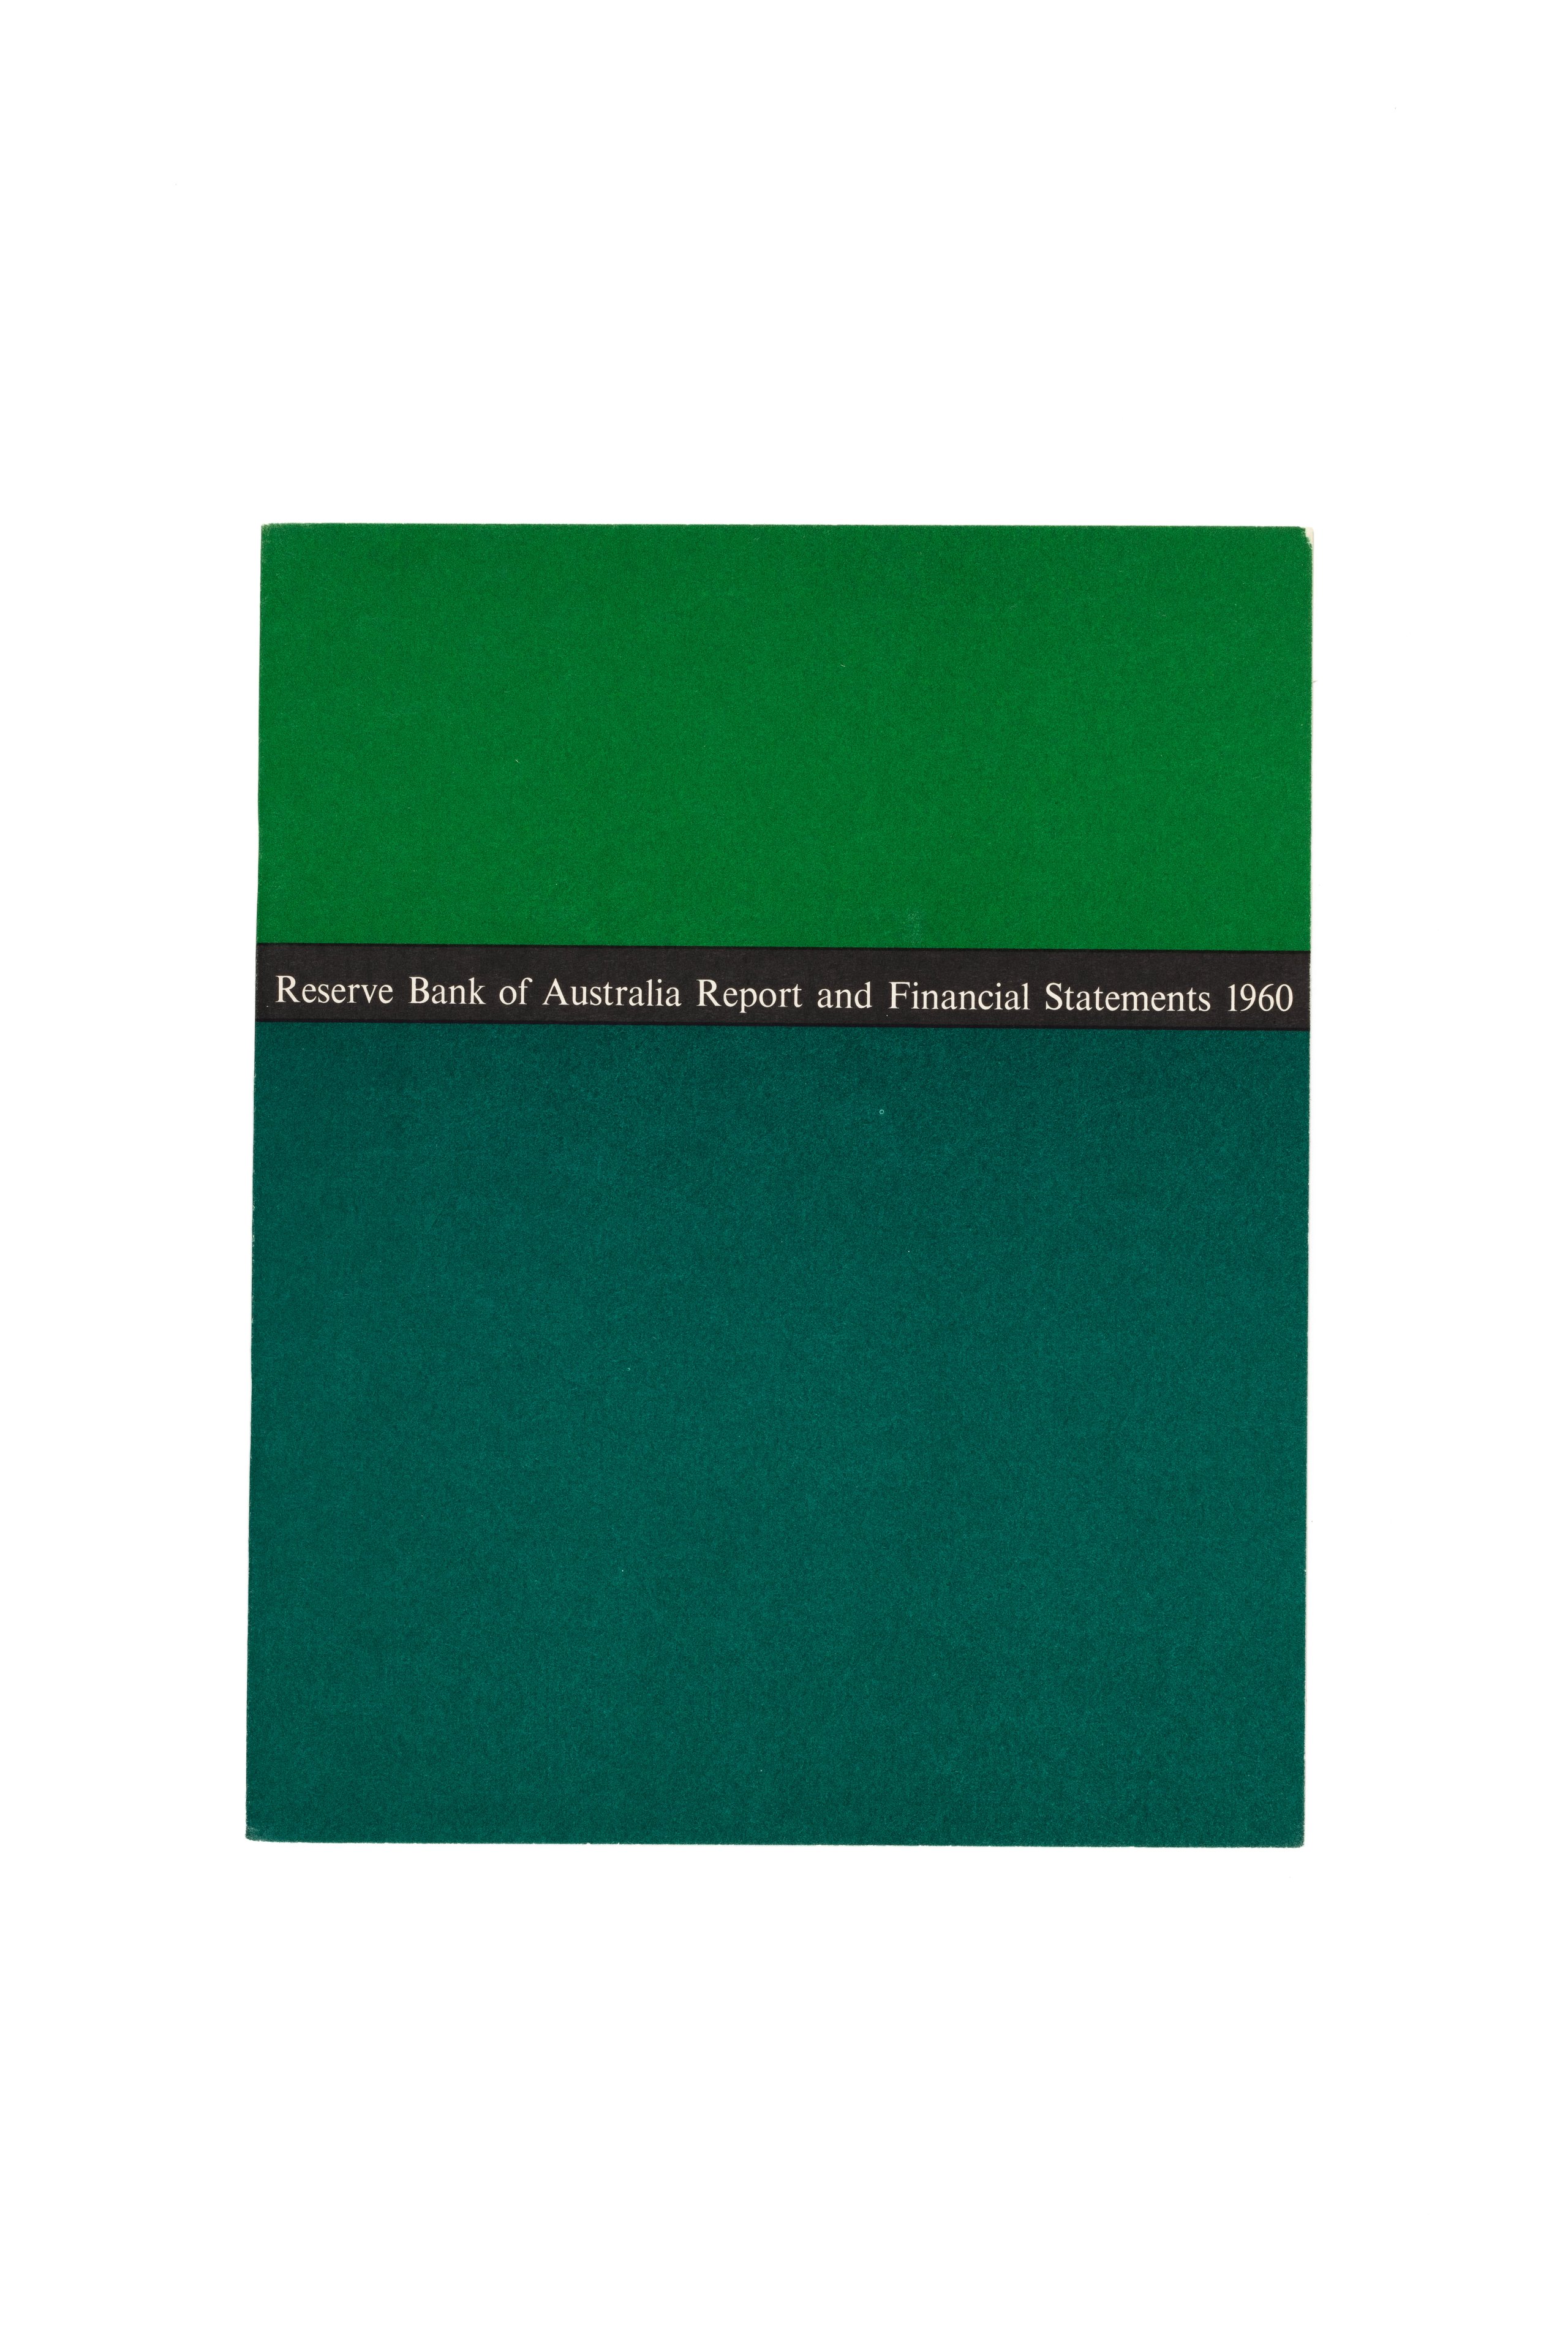 RBA annual report designed by Alistair Morrison